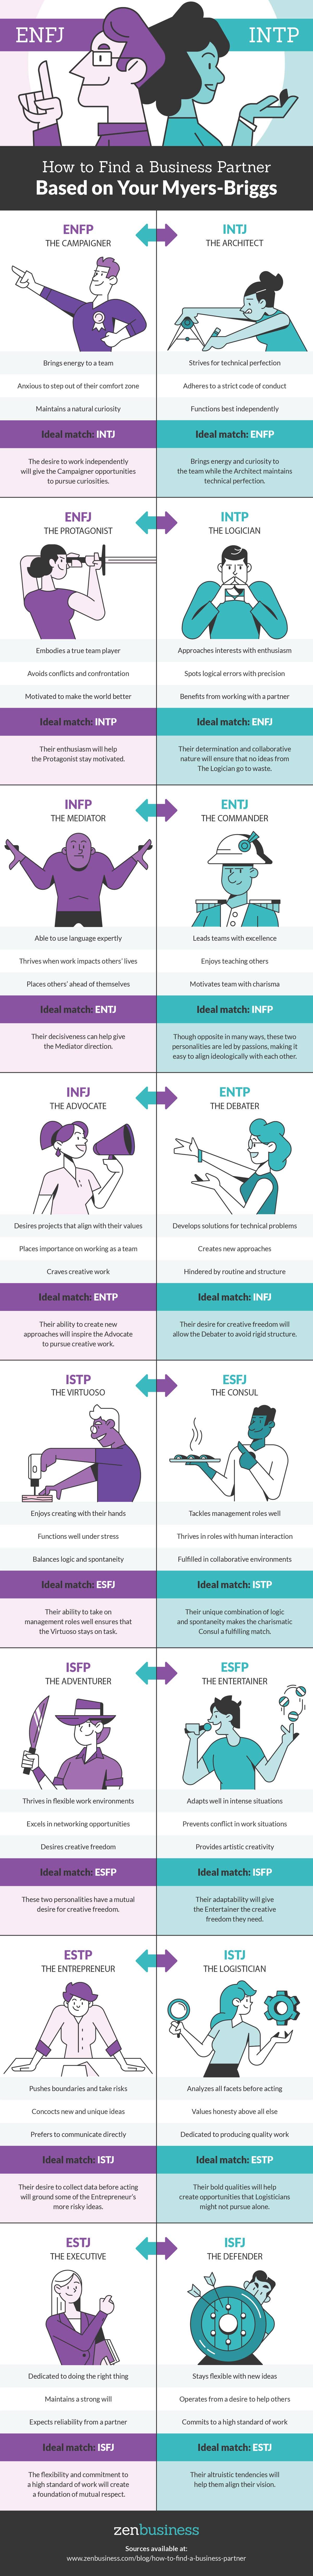 How to Find a Business Partner Based on your Myers-Briggs #infographic